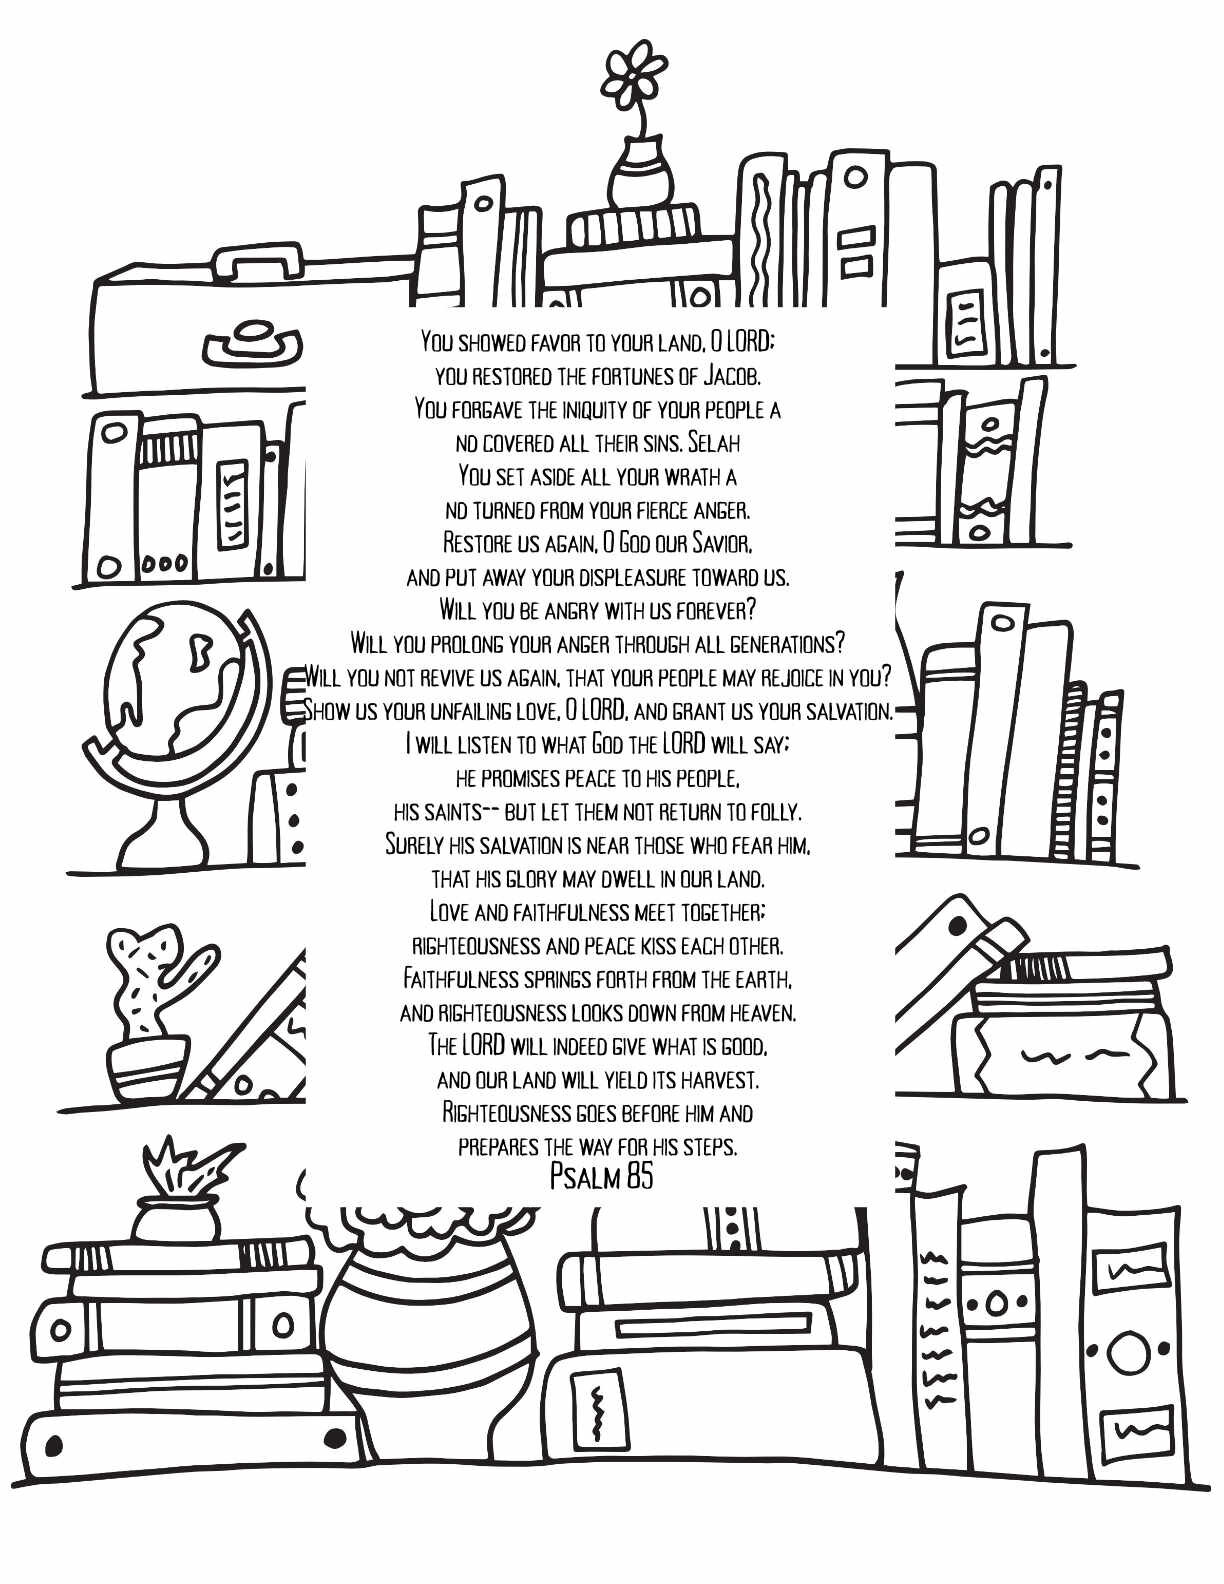 10 Free Printable Psalm Coloring Pages - Download and Color Adult Scripture - Psalm 85CLICK HERE TO DOWNLOAD THIS PAGE FREE